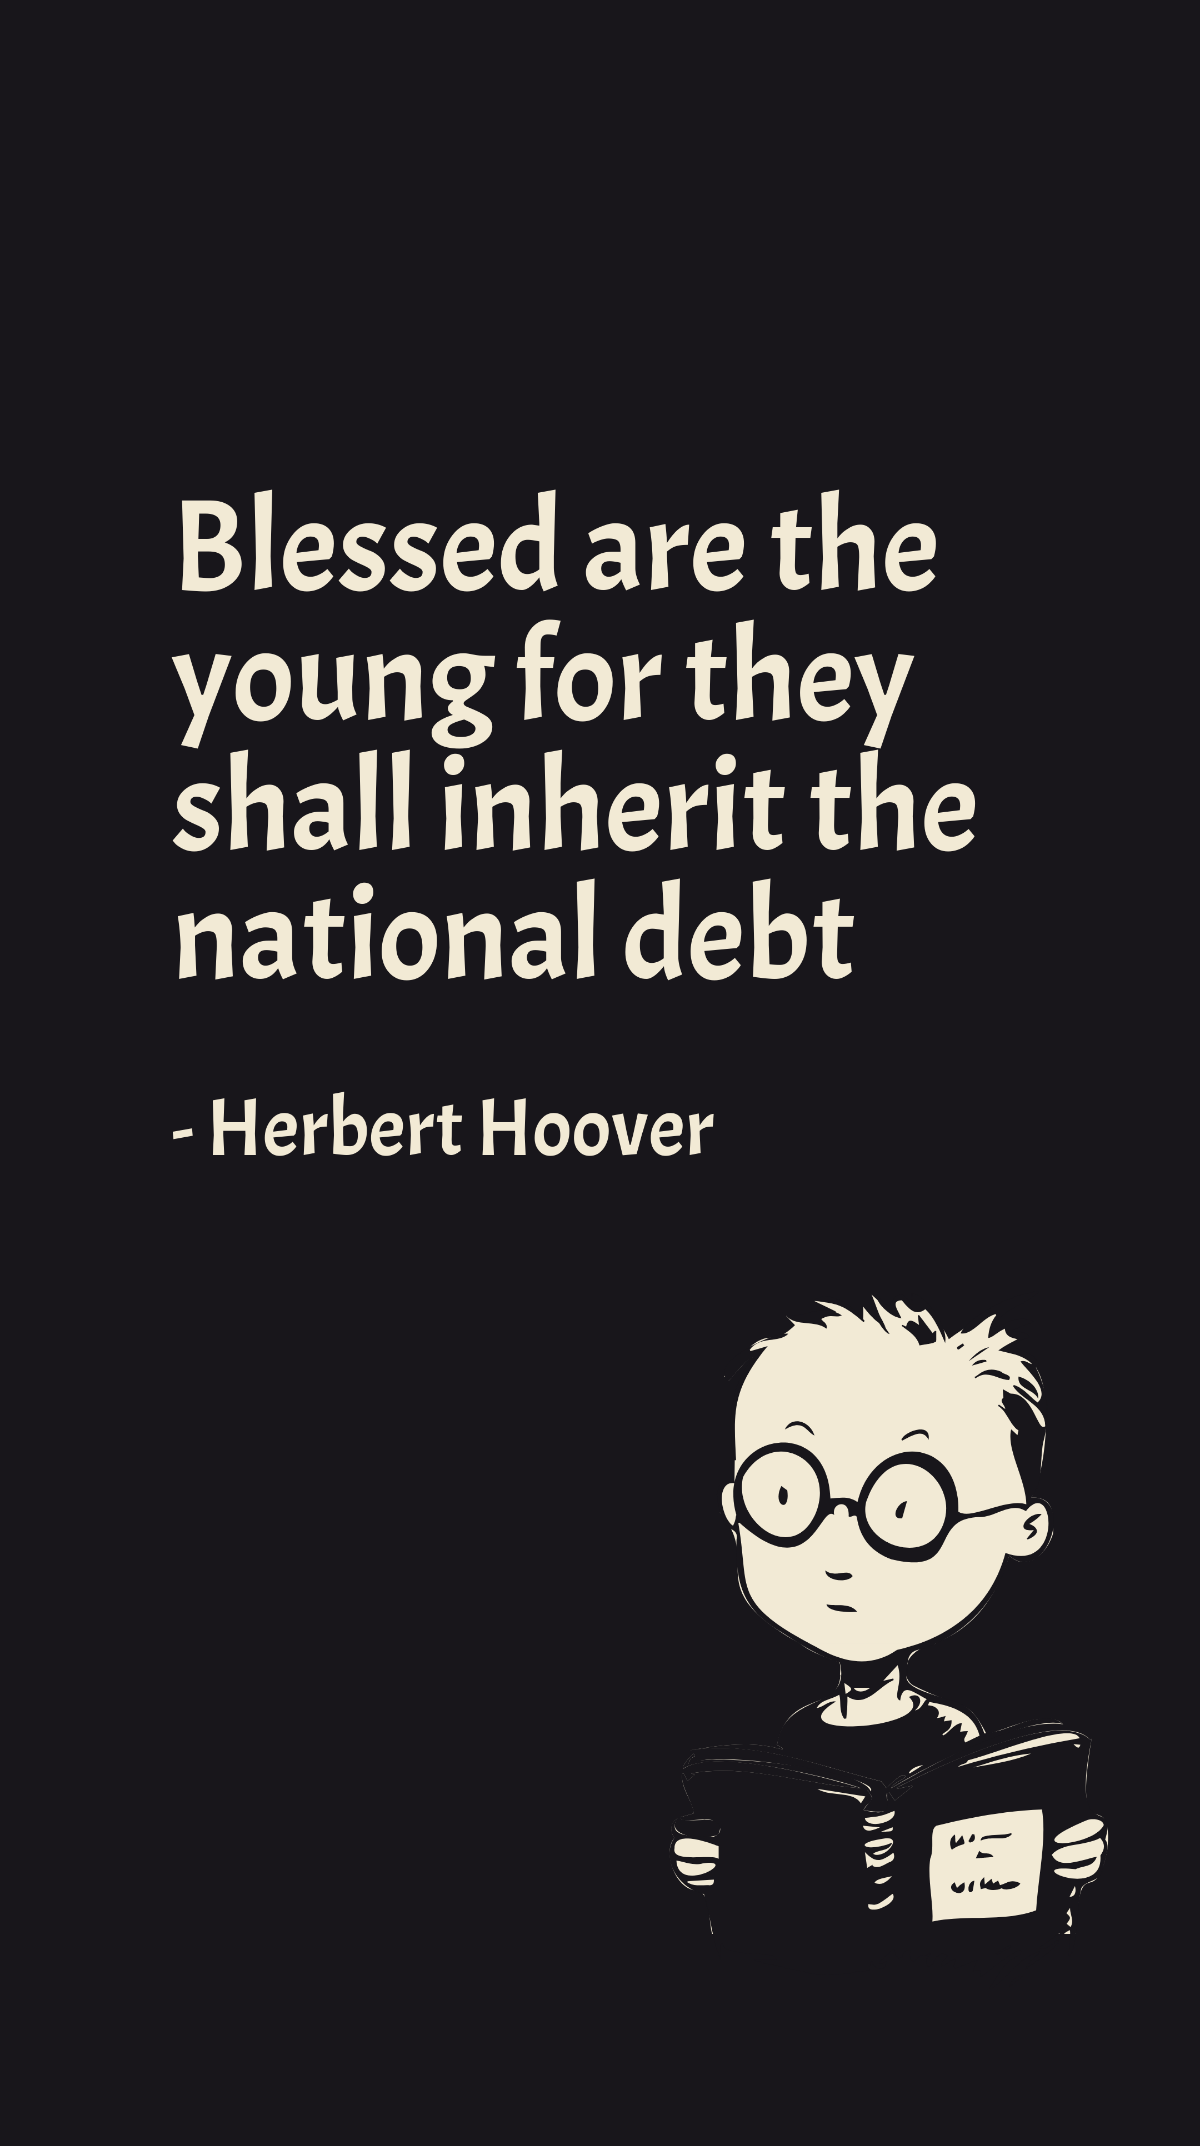 Free Herbert Hoover - Blessed are the young for they shall inherit the national debt Template